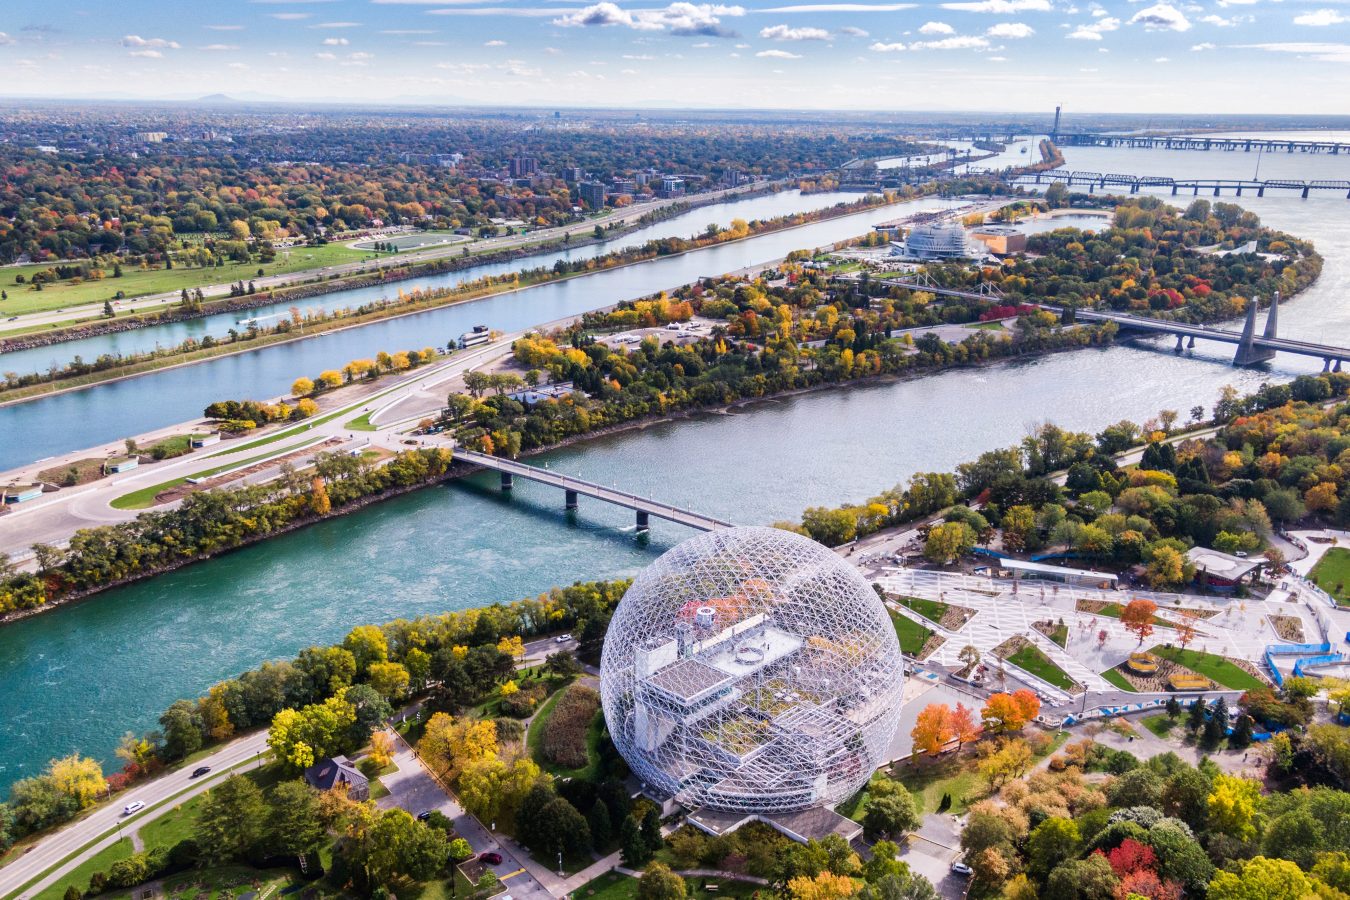 Aerial view of Montreal showing the Biosphere Environment Museum and Saint Lawrence River in fall season in Quebec, Canada.